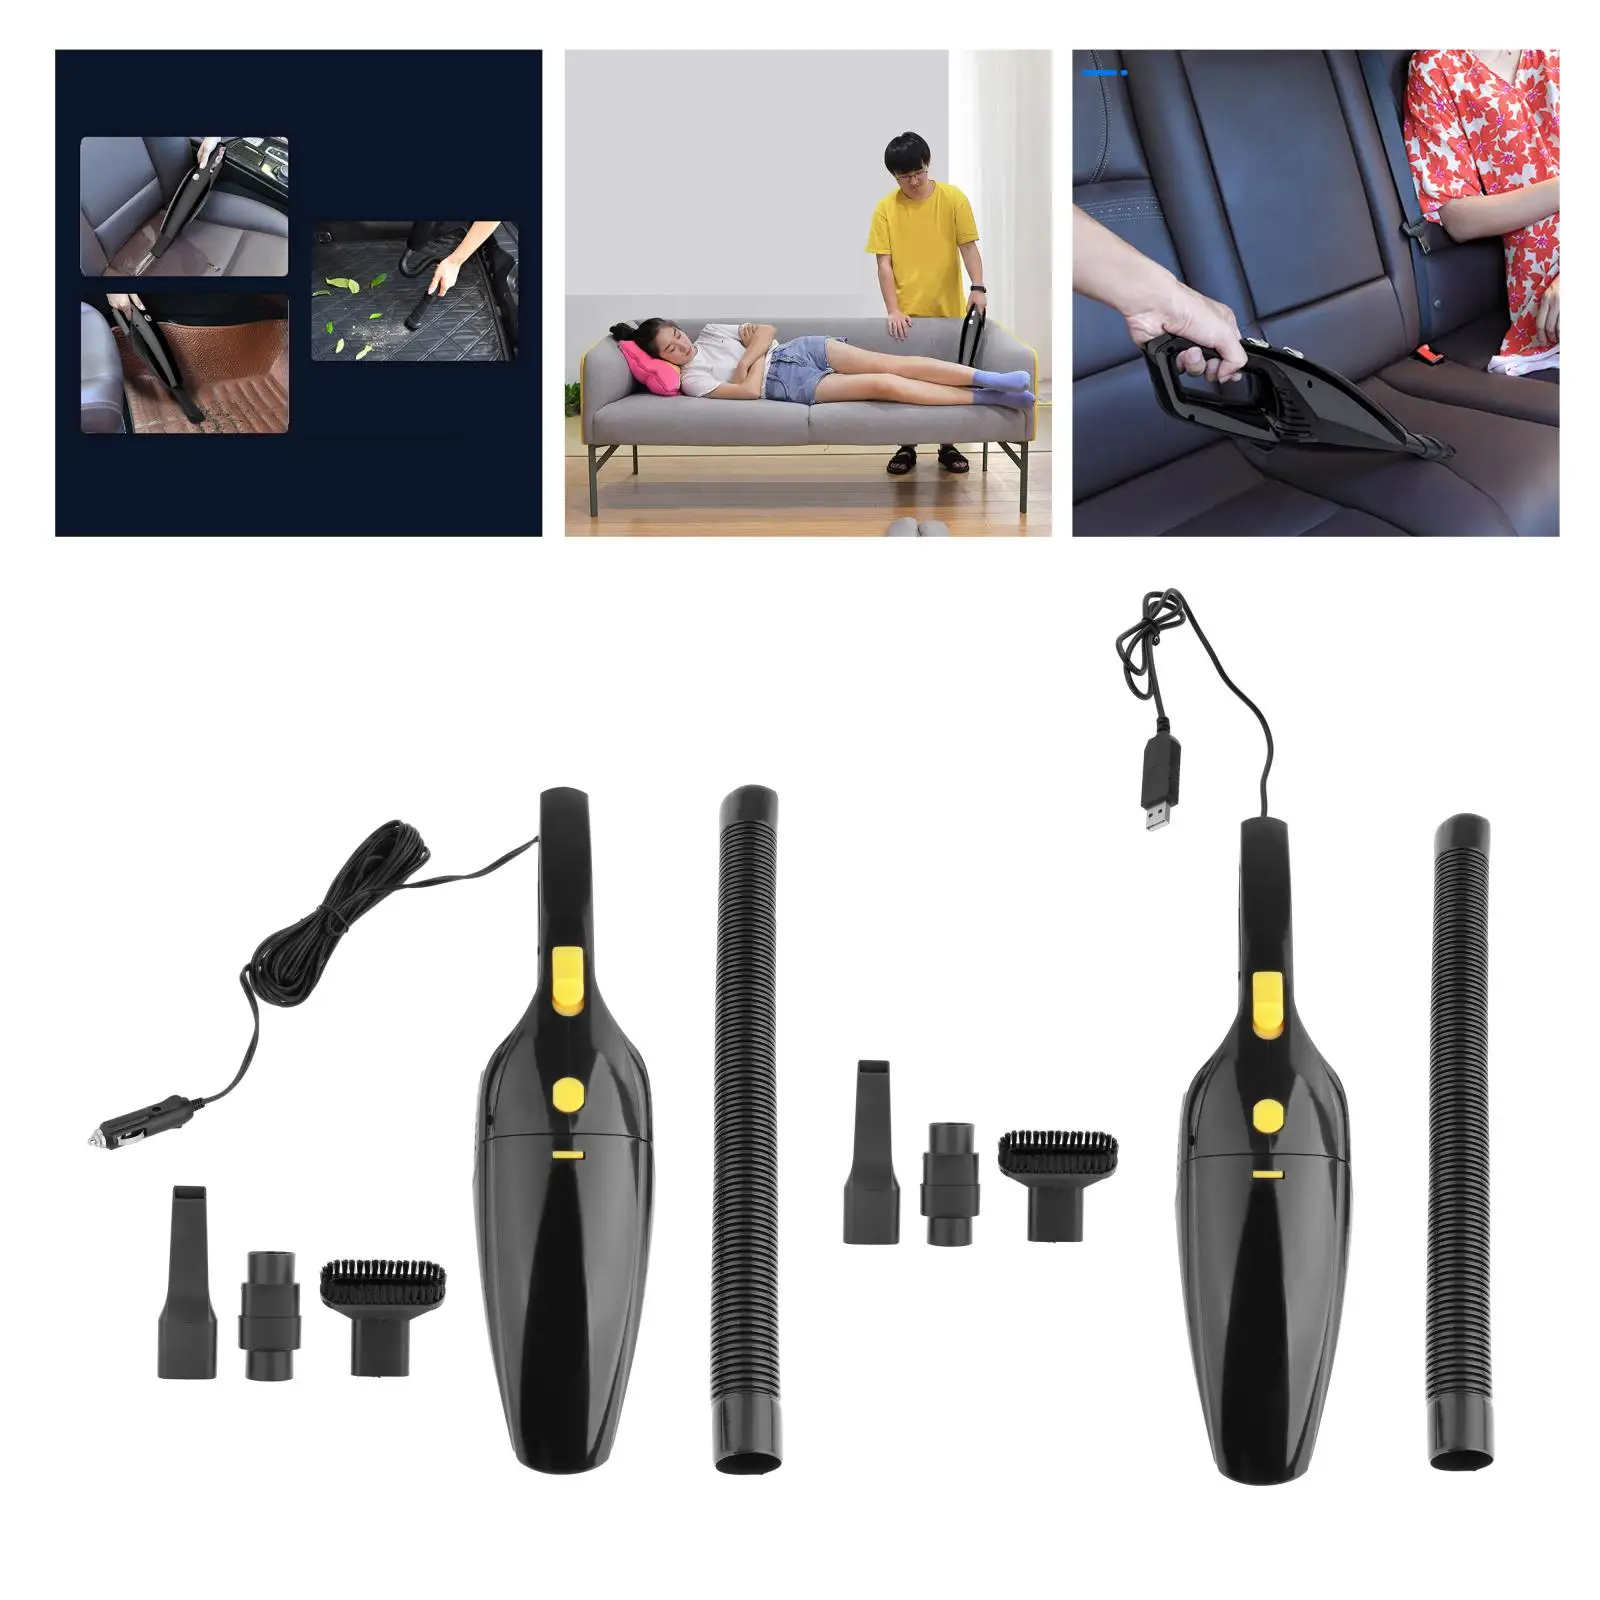 Car Home Handheld Cordless Vacuum Cleaner, 6000Pa Cyclonic Suctioning and Deep Cleaning